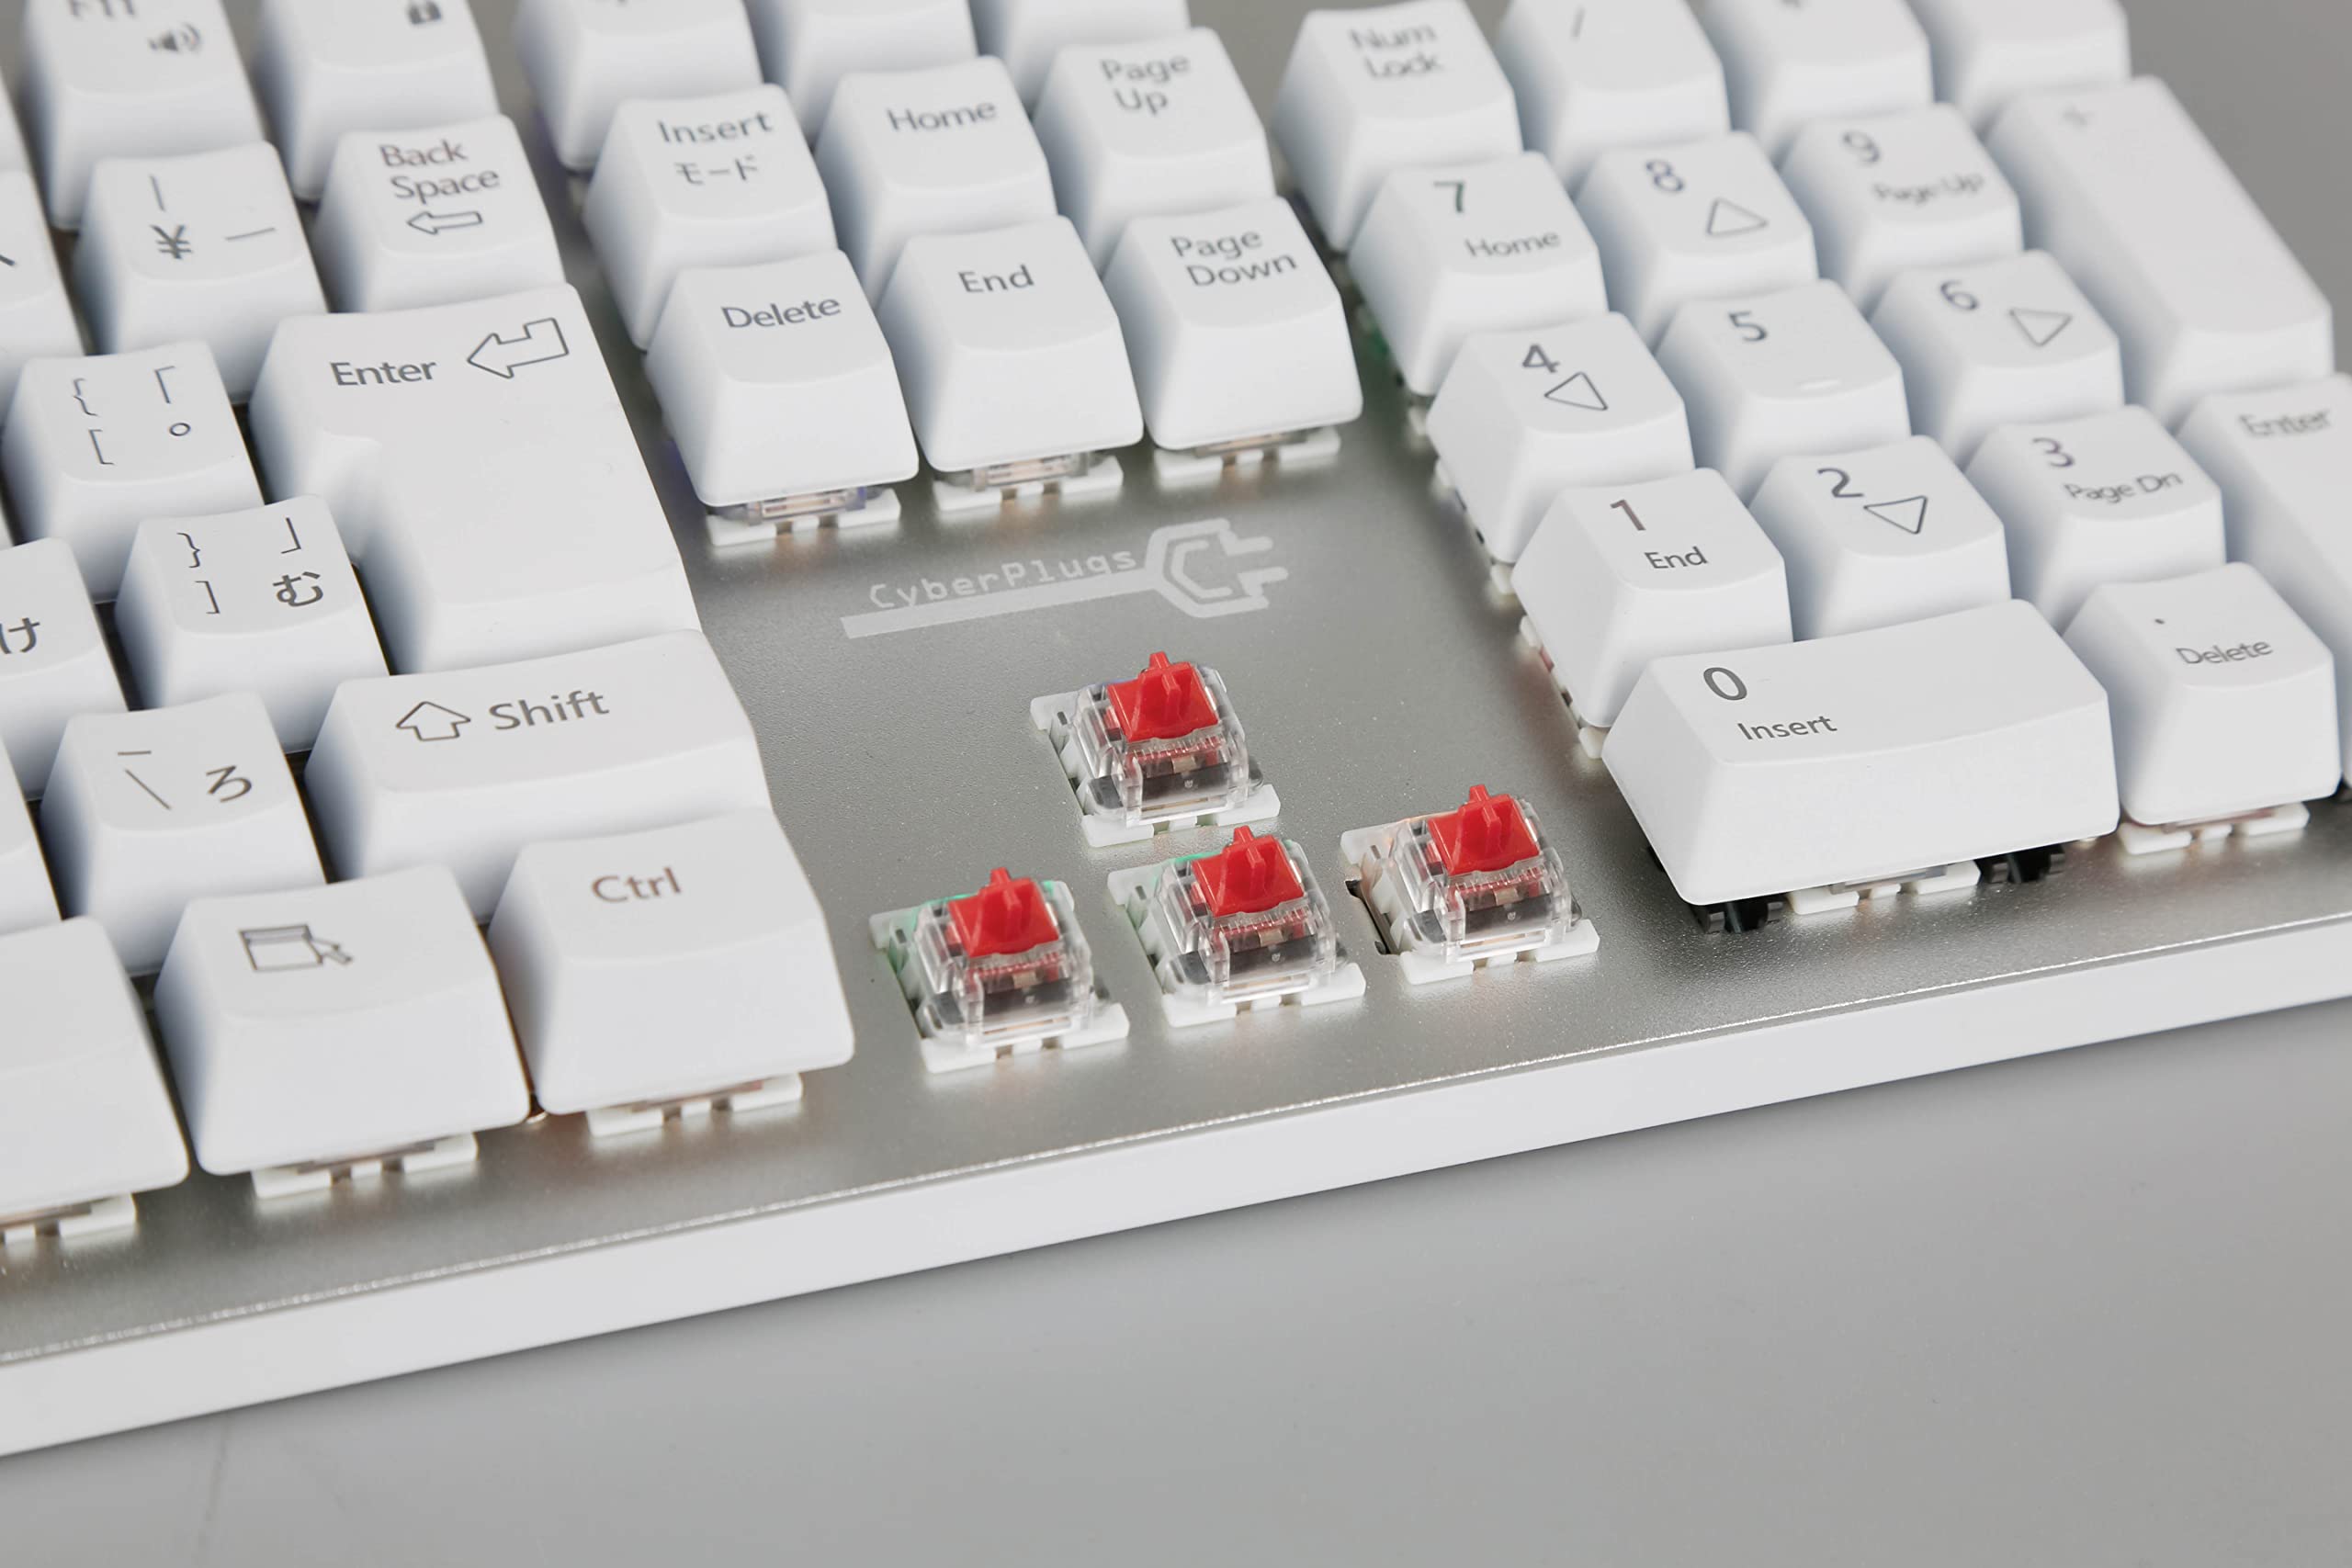 Cyberplugs NASR Series Gaming Keyboard, White, Red Axis, JIS Japanese Layout, Keyboard, Mechanical Keyboard, 20 LED Color Changes, All Keys, Independent Settings, Full Size, 108 Keys, Collision